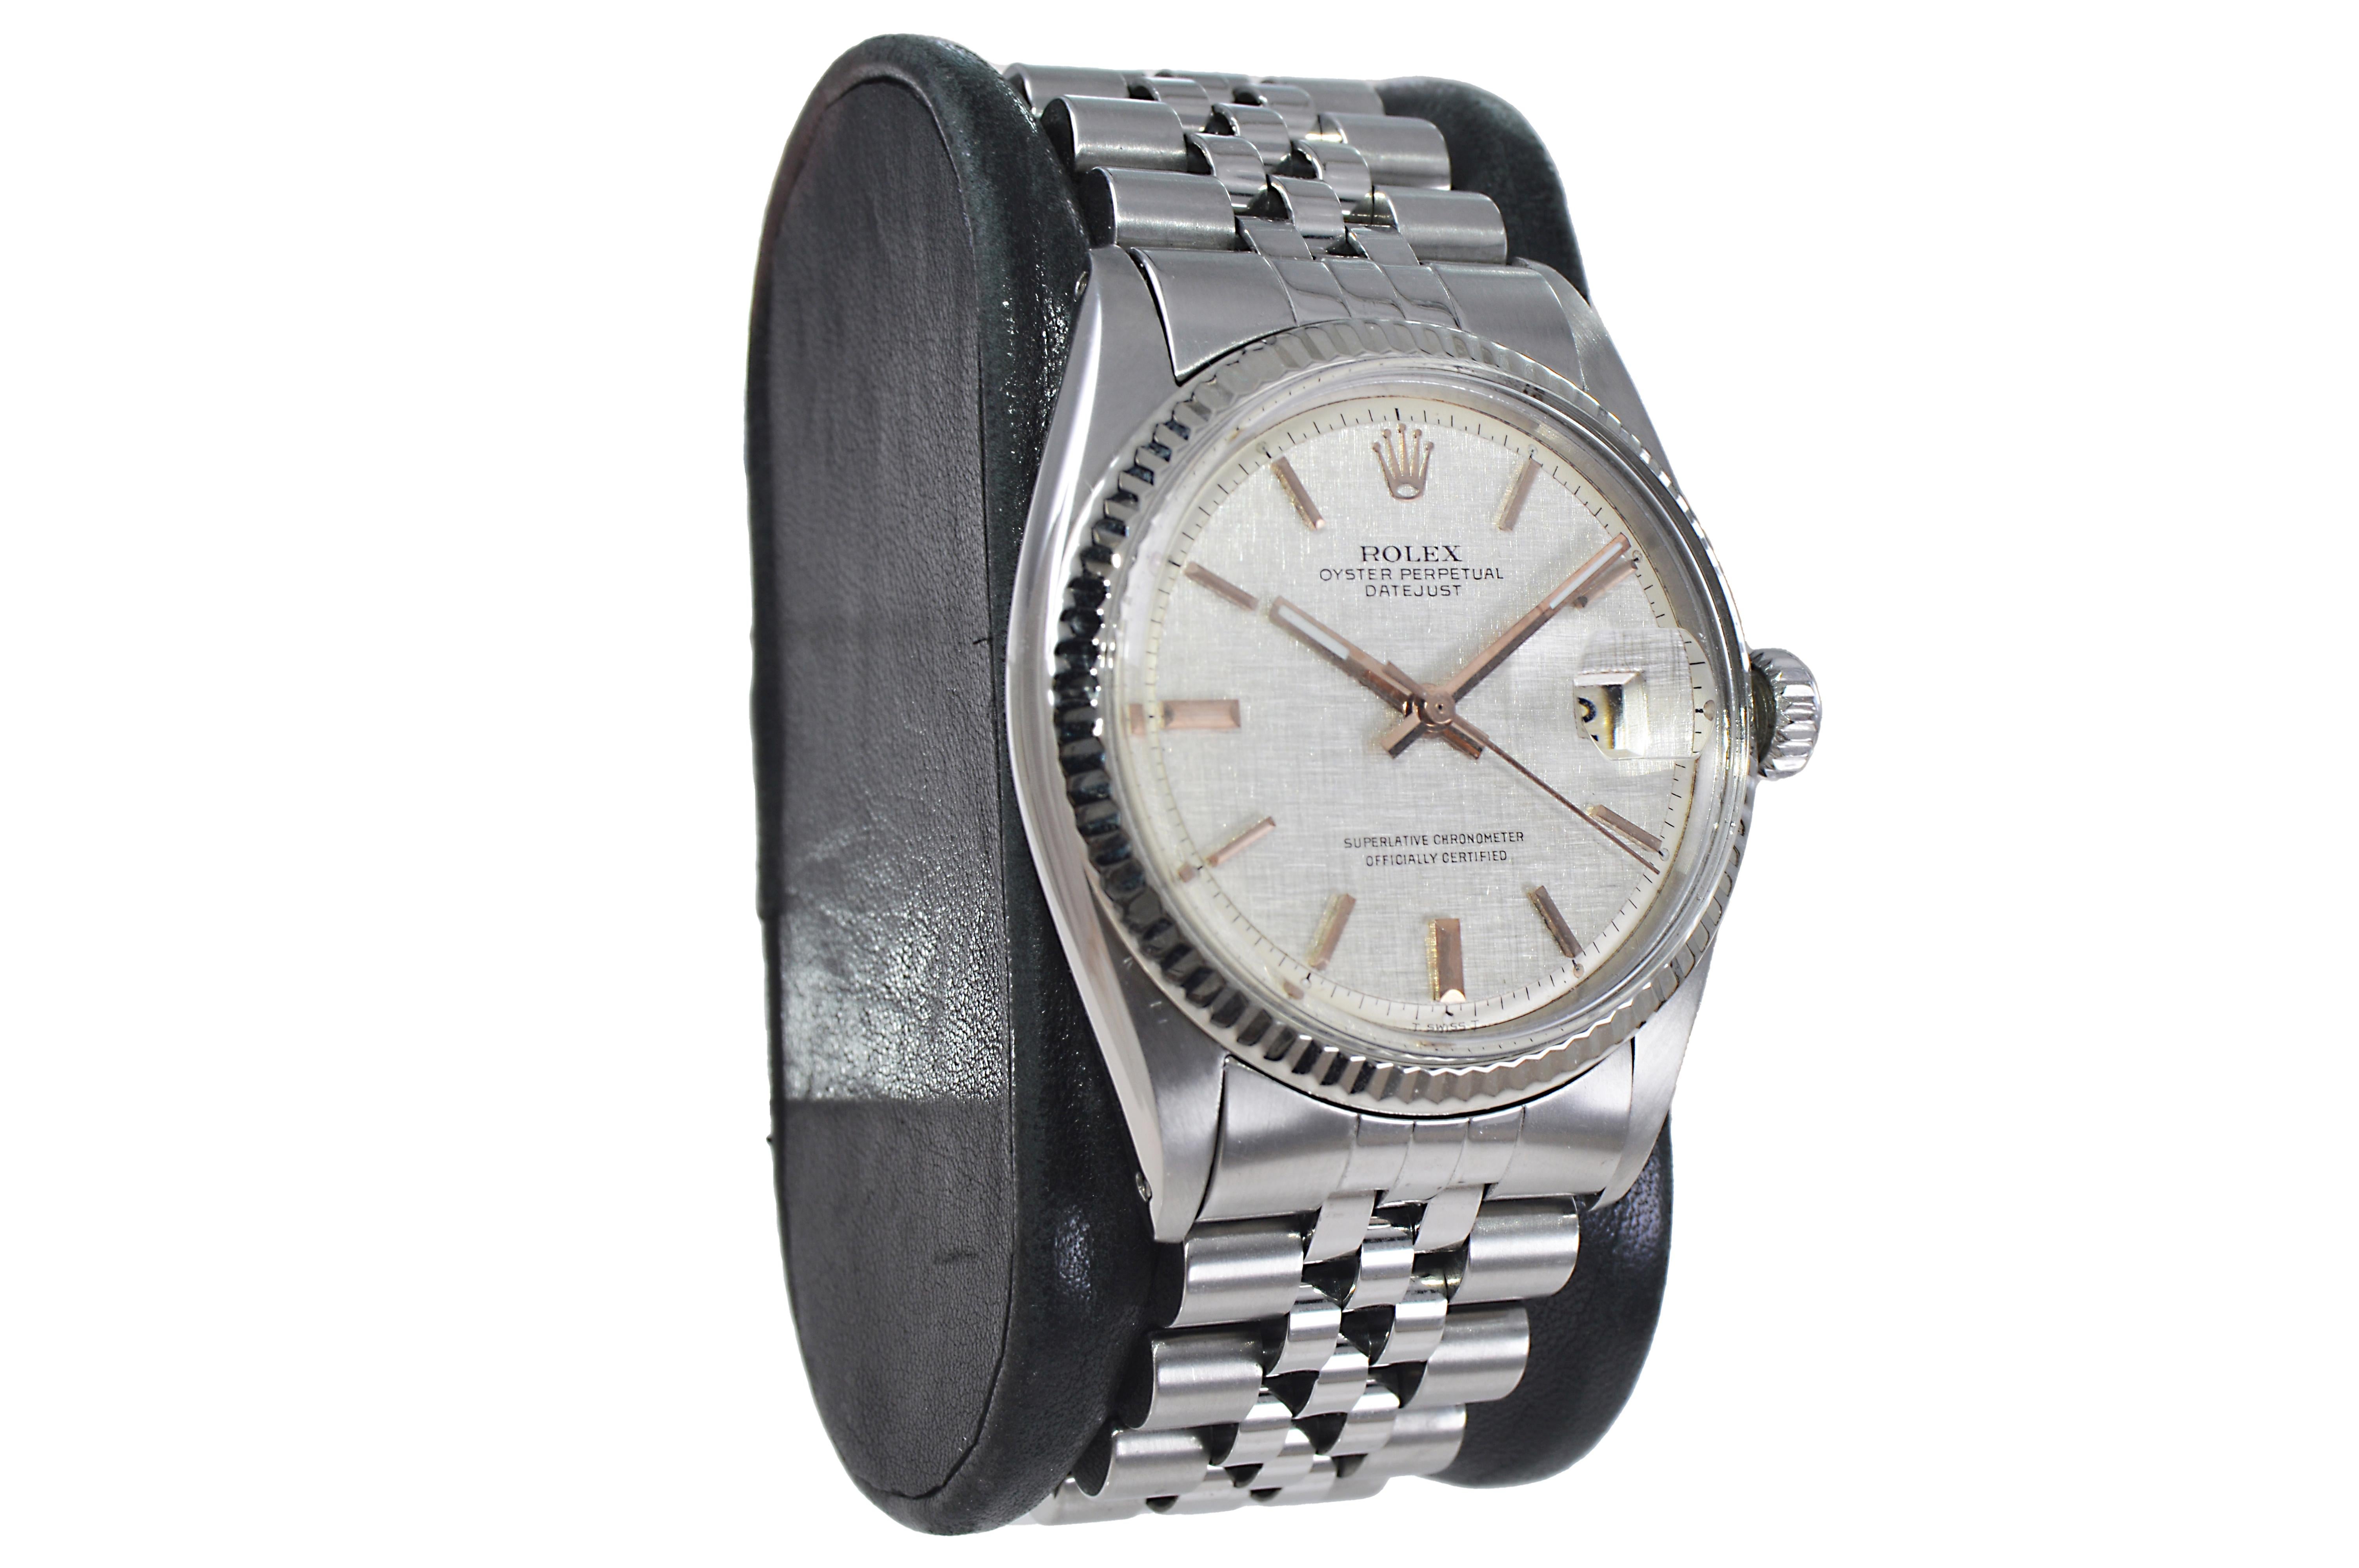 FACTORY / HOUSE: Rolex Watch Company 
STYLE / REFERENCE: Datejust / Reference 1601
METAL / MATERIAL: Stainless Steel
CIRCA / YEAR: Late 1960's
DIMENSIONS / SIZE: Length 43mm X Diameter 36mm 
MOVEMENT / CALIBER: Perpetual Winding / 26 Jewels /